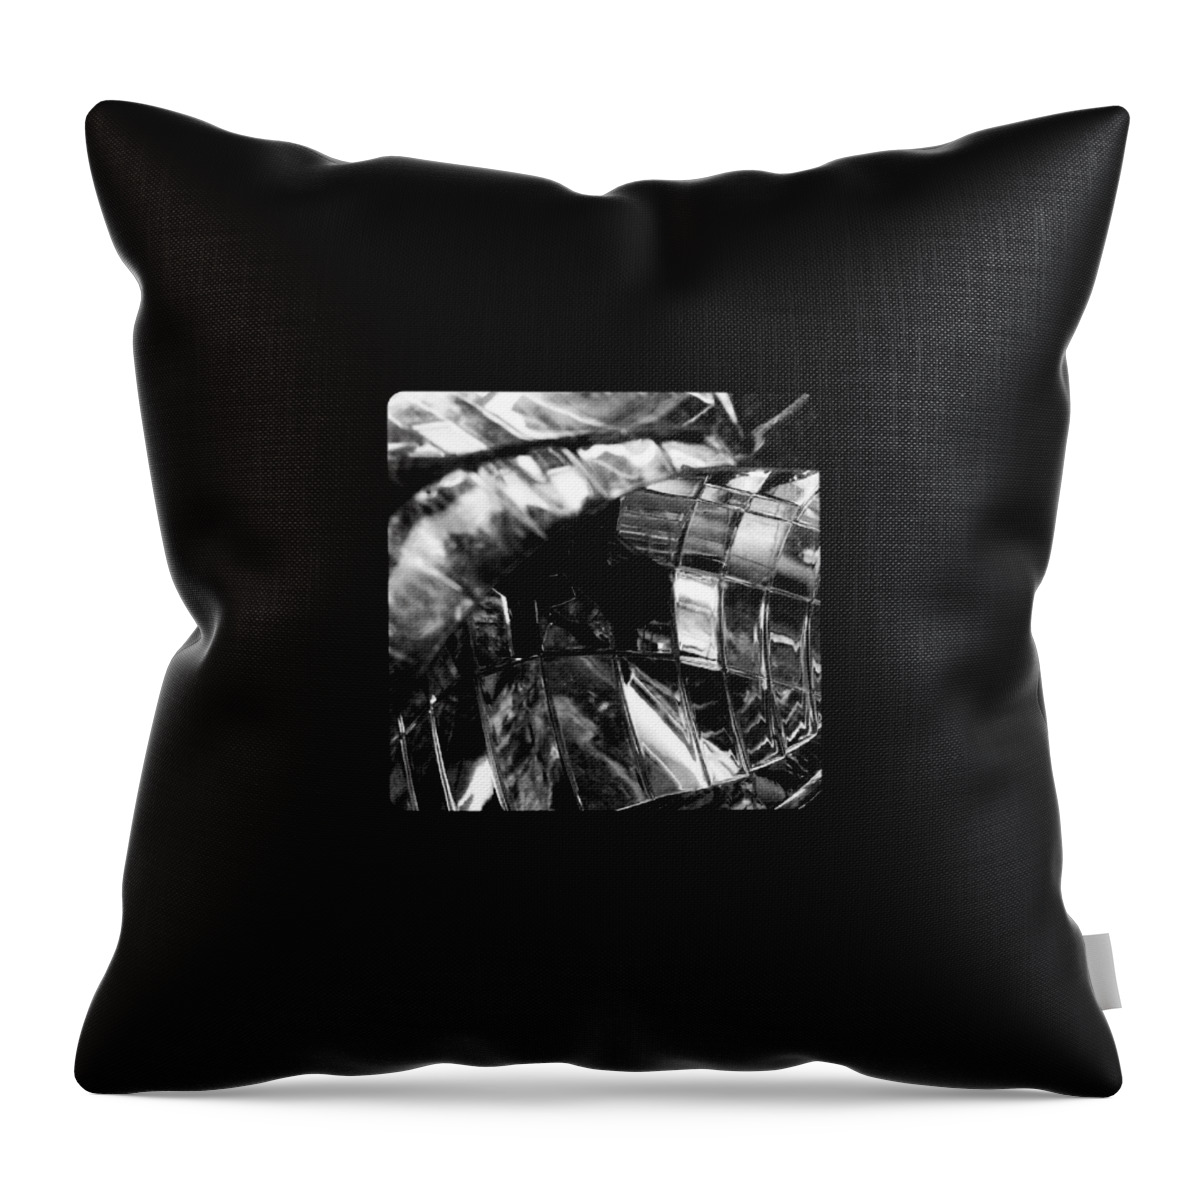 Monochromatic Throw Pillow featuring the photograph Motorbike Light by Jason Roust